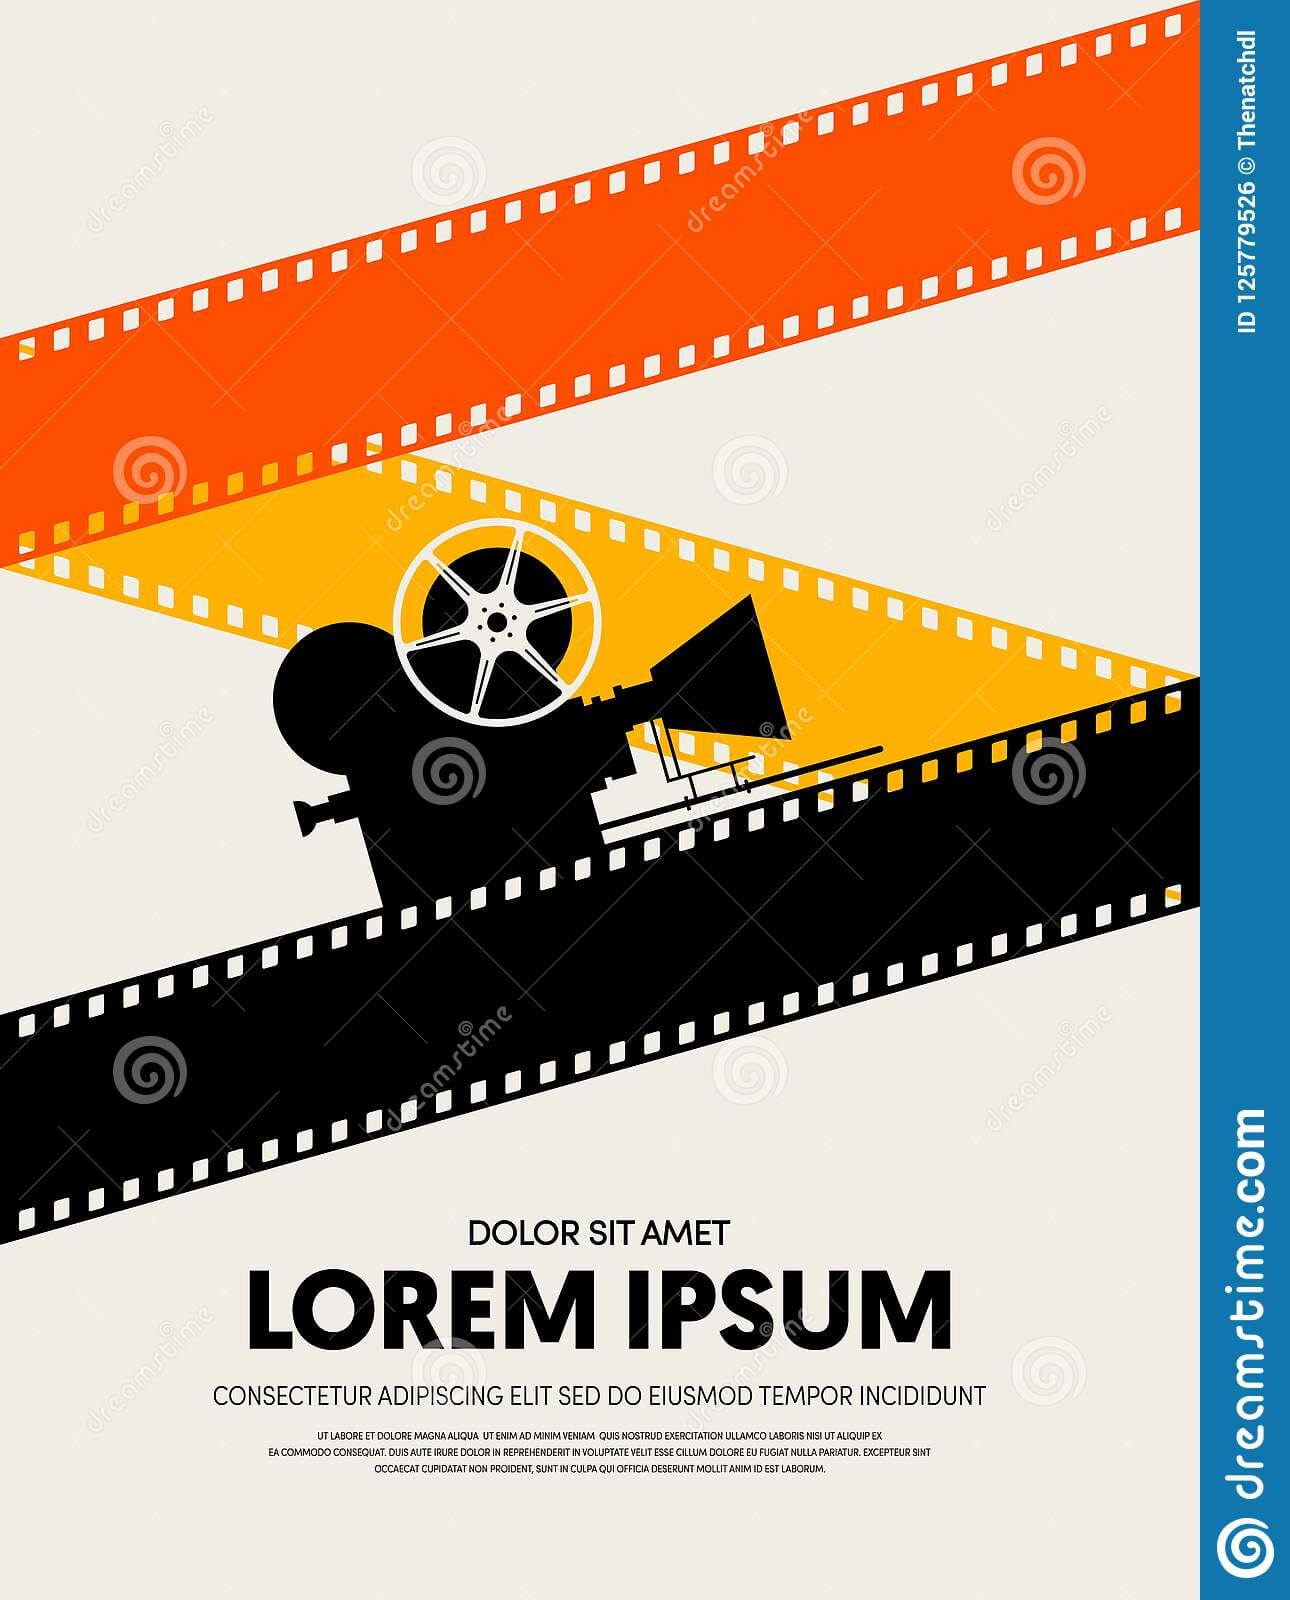 Movie And Film Festival Poster Template Design Stock With Film Festival Brochure Template